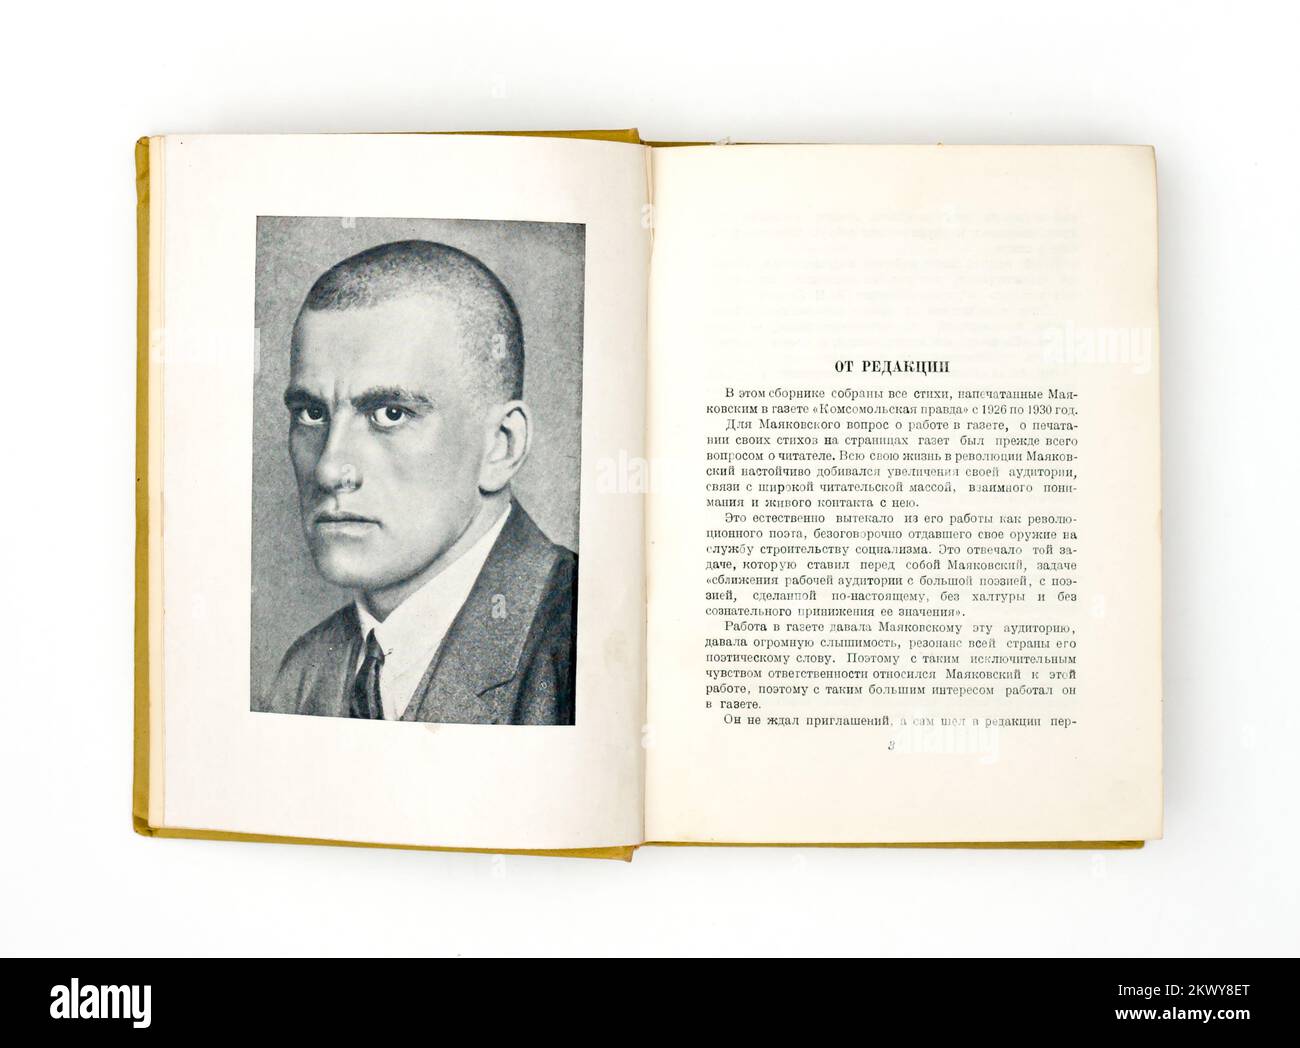 The 'On the agenda' (Russian: В повестку дня) by Vladimir Mayakovsky, first published in 1936 in USSR. Stock Photo